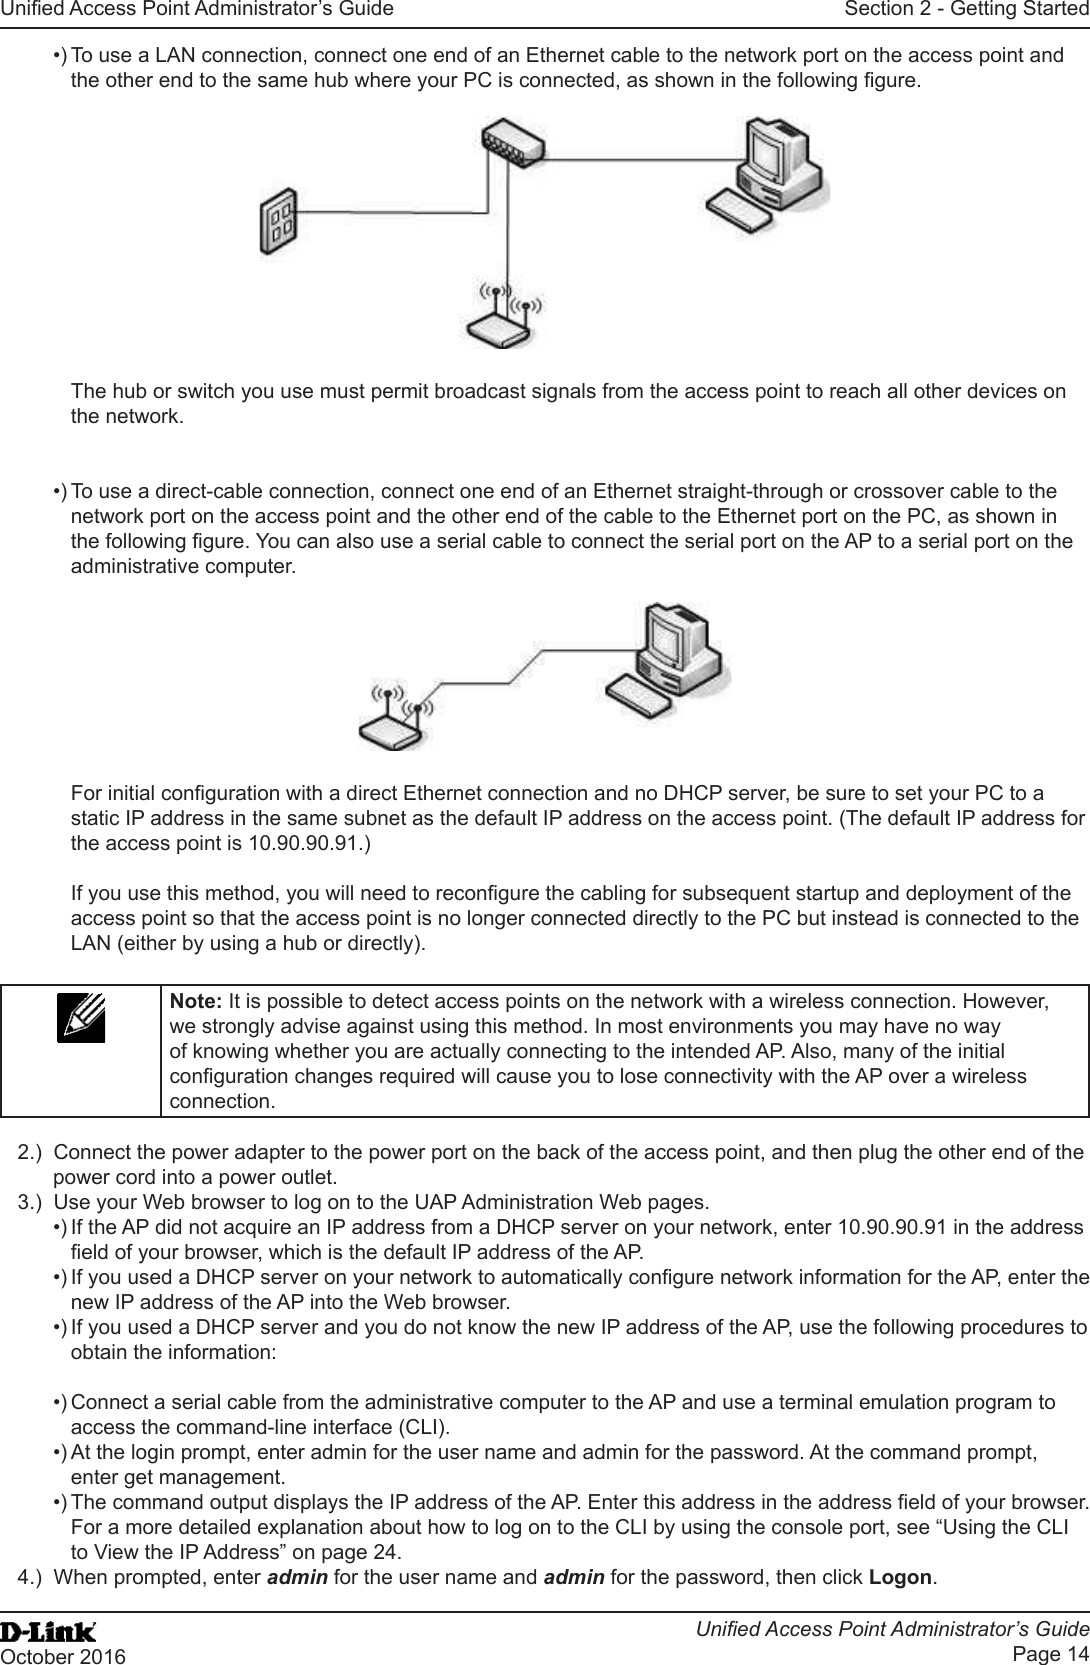 Unied Access Point Administrator’s GuideUnied Access Point Administrator’s GuidePage 14October 2016Section 2 - Getting Started•) To use a LAN connection, connect one end of an Ethernet cable to the network port on the access point and the other end to the same hub where your PC is connected, as shown in the following gure.The hub or switch you use must permit broadcast signals from the access point to reach all other devices on the network.•) To use a direct-cable connection, connect one end of an Ethernet straight-through or crossover cable to the network port on the access point and the other end of the cable to the Ethernet port on the PC, as shown in the following gure. You can also use a serial cable to connect the serial port on the AP to a serial port on the administrative computer.For initial conguration with a direct Ethernet connection and no DHCP server, be sure to set your PC to a static IP address in the same subnet as the default IP address on the access point. (The default IP address for the access point is 10.90.90.91.)If you use this method, you will need to recongure the cabling for subsequent startup and deployment of the access point so that the access point is no longer connected directly to the PC but instead is connected to the LAN (either by using a hub or directly).Note: It is possible to detect access points on the network with a wireless connection. However, we strongly advise against using this method. In most environments you may have no way of knowing whether you are actually connecting to the intended AP. Also, many of the initial conguration changes required will cause you to lose connectivity with the AP over a wireless connection.2.)  Connect the power adapter to the power port on the back of the access point, and then plug the other end of the power cord into a power outlet.3.)  Use your Web browser to log on to the UAP Administration Web pages.•) If the AP did not acquire an IP address from a DHCP server on your network, enter 10.90.90.91 in the address eld of your browser, which is the default IP address of the AP.•) If you used a DHCP server on your network to automatically congure network information for the AP, enter the new IP address of the AP into the Web browser.•) If you used a DHCP server and you do not know the new IP address of the AP, use the following procedures to obtain the information:•) Connect a serial cable from the administrative computer to the AP and use a terminal emulation program to access the command-line interface (CLI).•) At the login prompt, enter admin for the user name and admin for the password. At the command prompt, enter get management.•) The command output displays the IP address of the AP. Enter this address in the address eld of your browser. For a more detailed explanation about how to log on to the CLI by using the console port, see “Using the CLI to View the IP Address” on page 24.4.)  When prompted, enter admin for the user name and admin for the password, then click Logon.